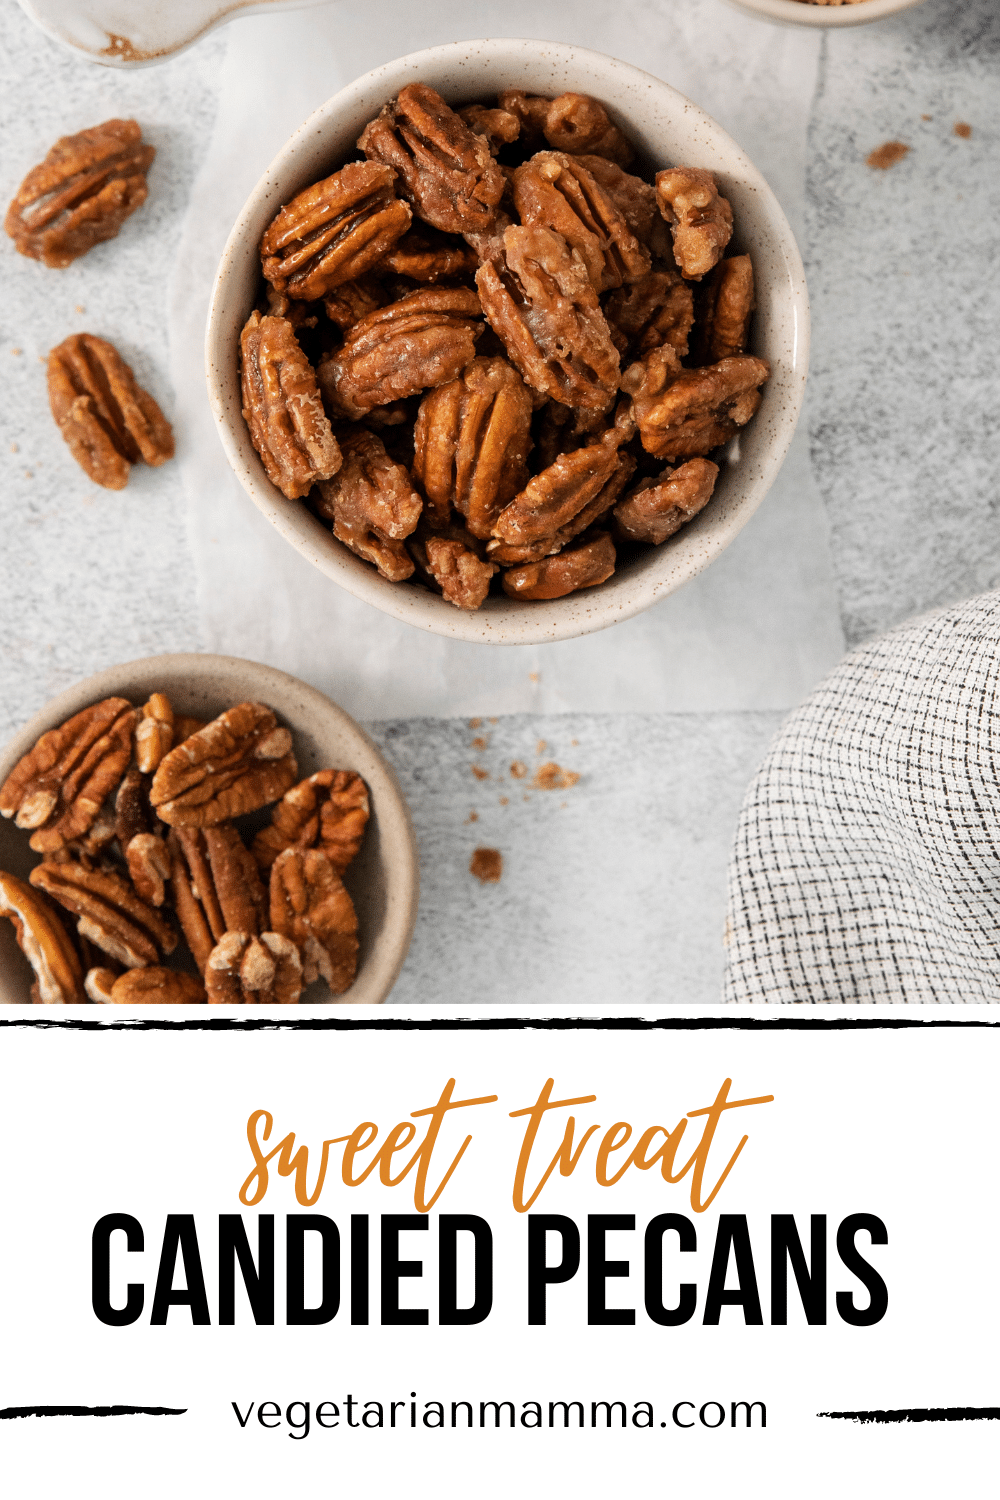 Candied Pecans are the perfect sweet and salty crunchy snack! Add them to salads, ice cream, or desserts, or eat them by the handful. They're easy to make with just a few ingredients and can be made in less than 15 minutes.